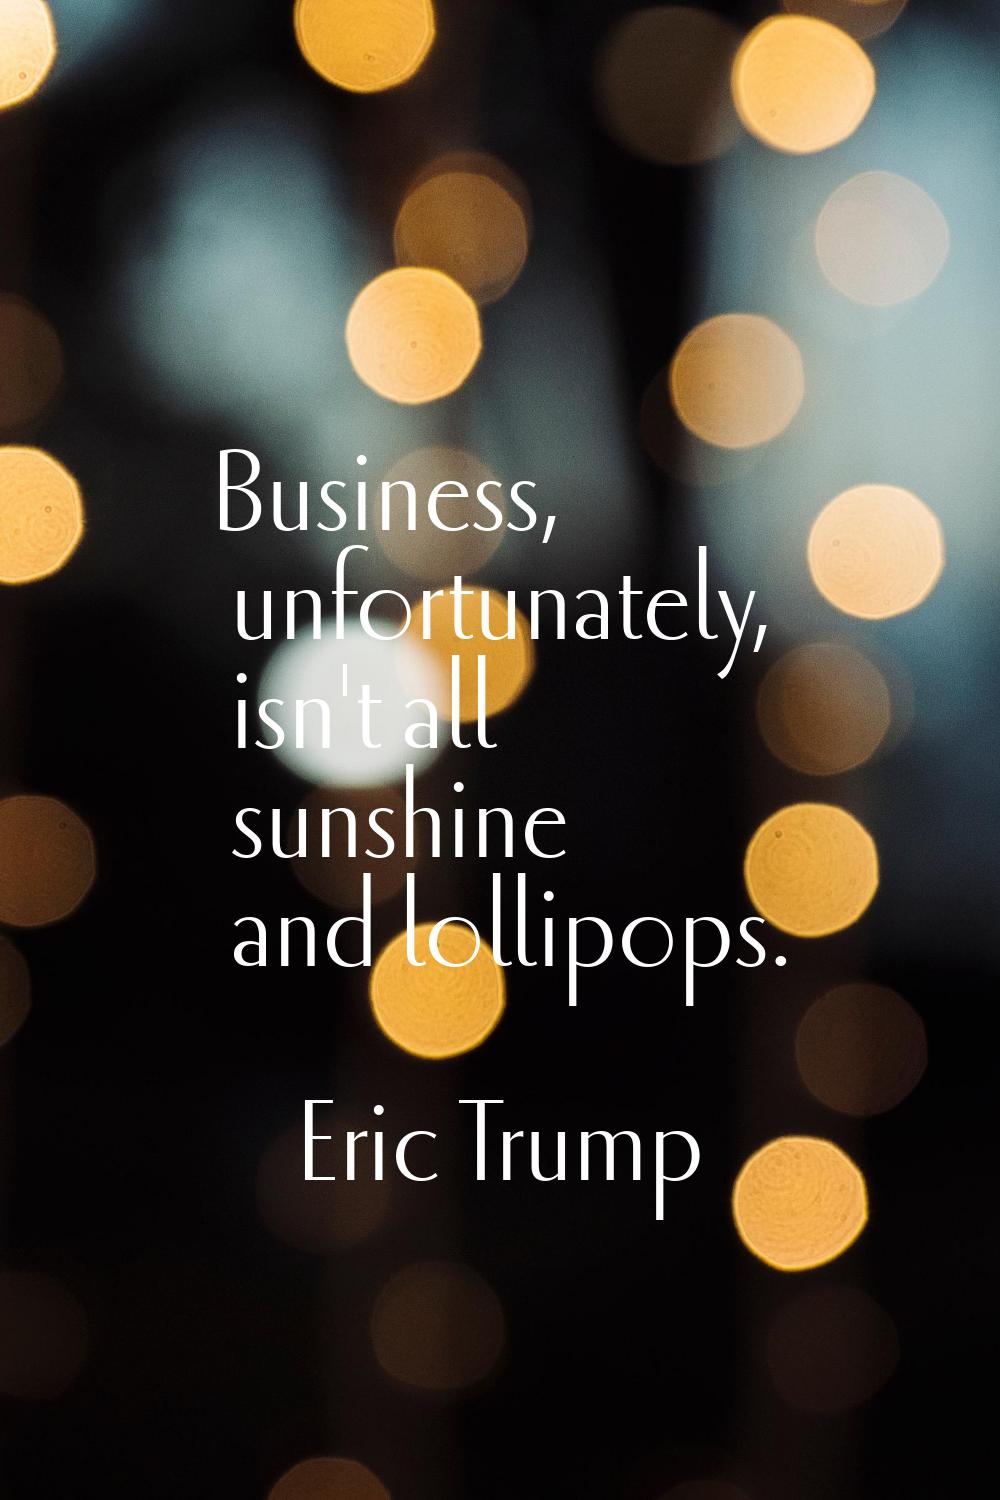 Business, unfortunately, isn't all sunshine and lollipops.